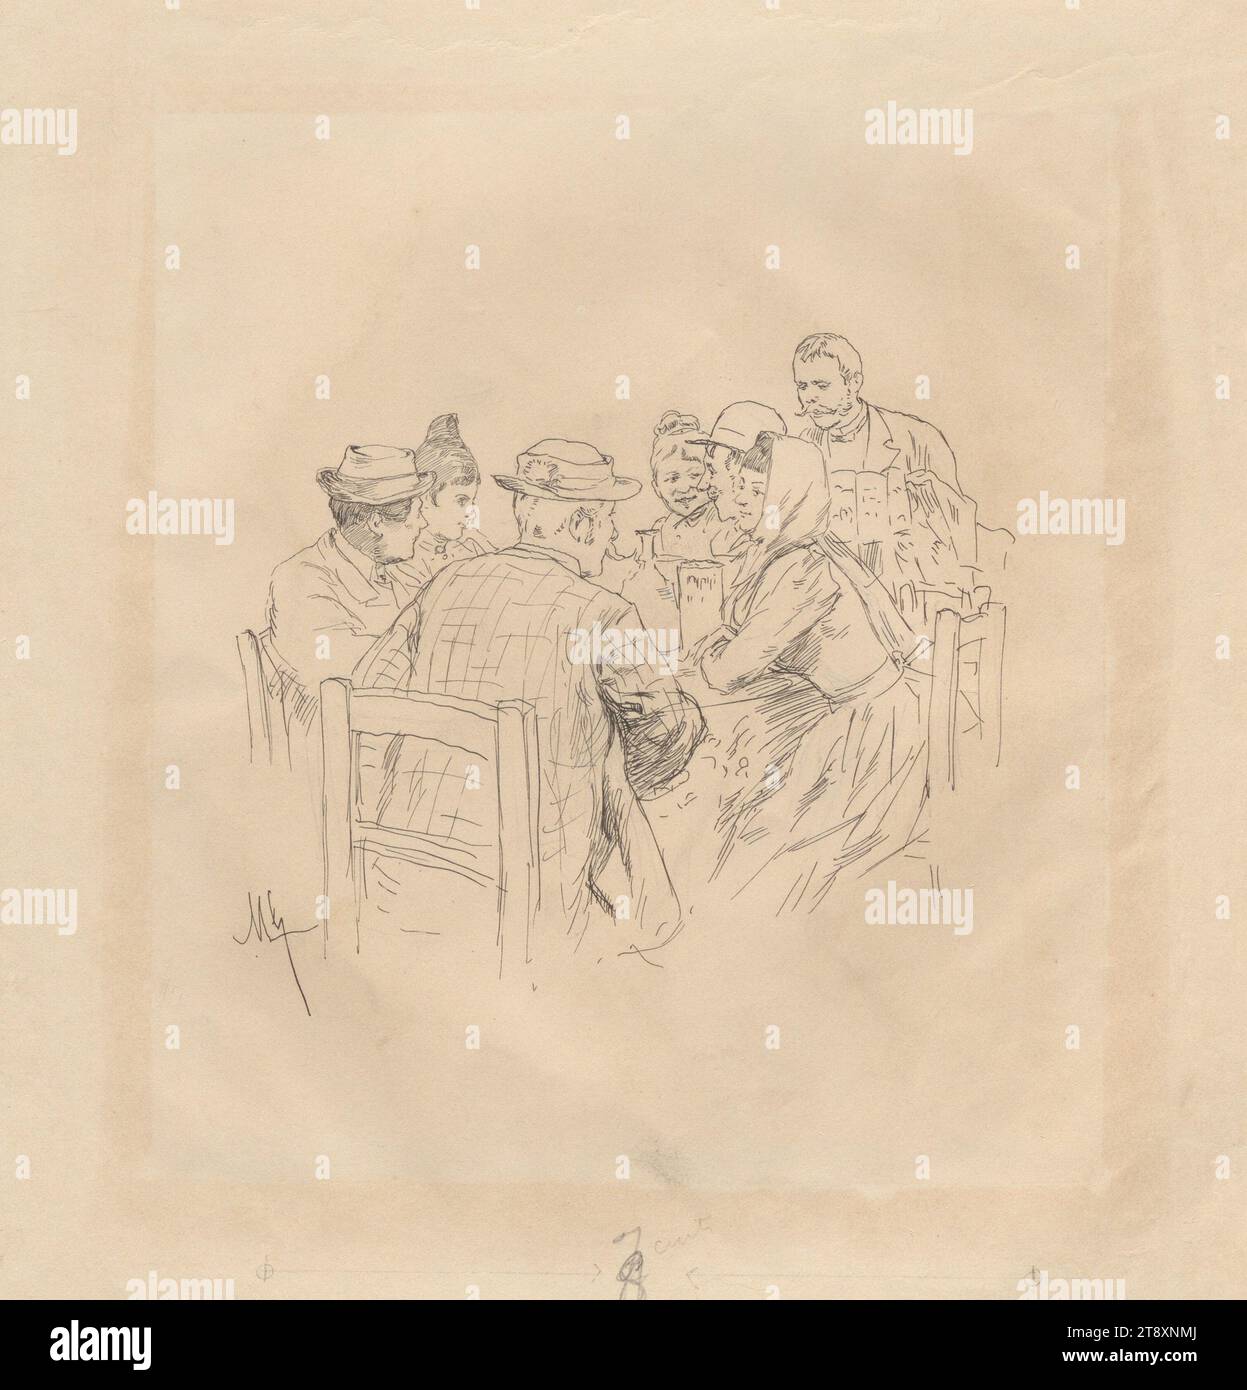 Final image: 'At the laundry place'', Felician von Myrbach-Rheinfeld (1853-1940), artist, 1895, paper, pen and ink drawing, height 20.2 cm, width 19.4 cm, leisure and recreation, worker, man, woman, The Vienna Collection Stock Photo